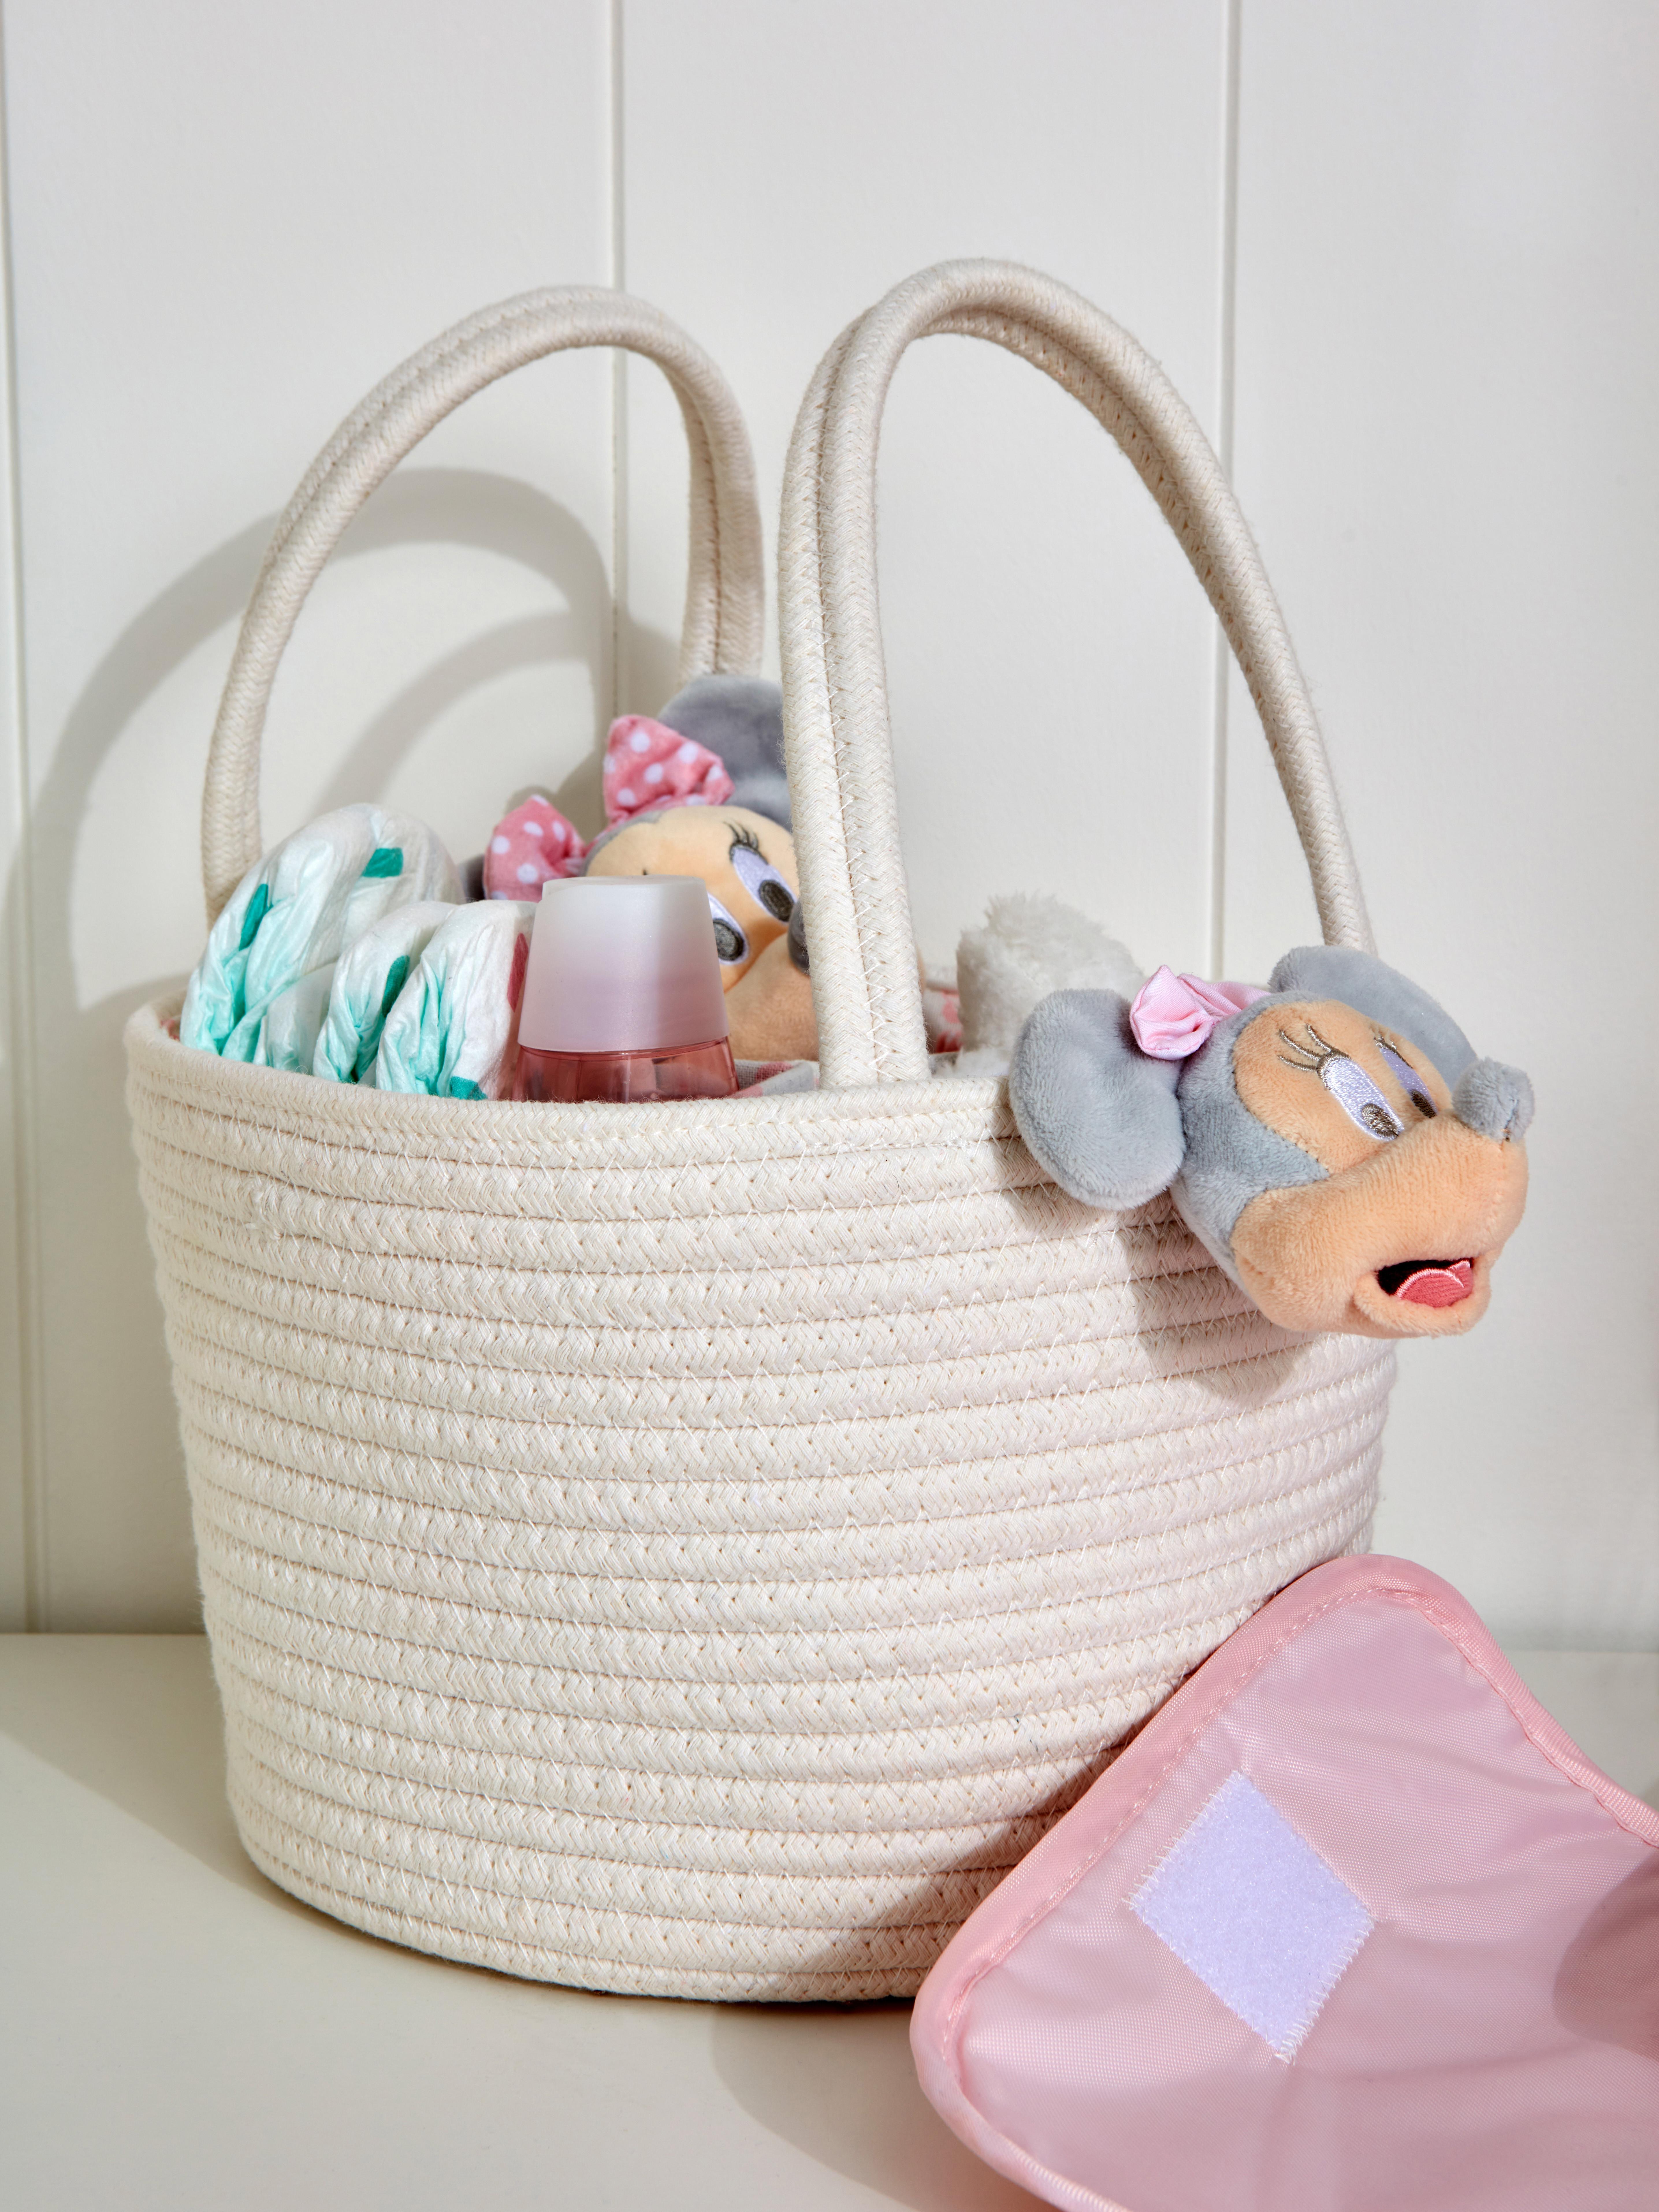 Disney’s Minnie Mouse Woven Section Storage Basket